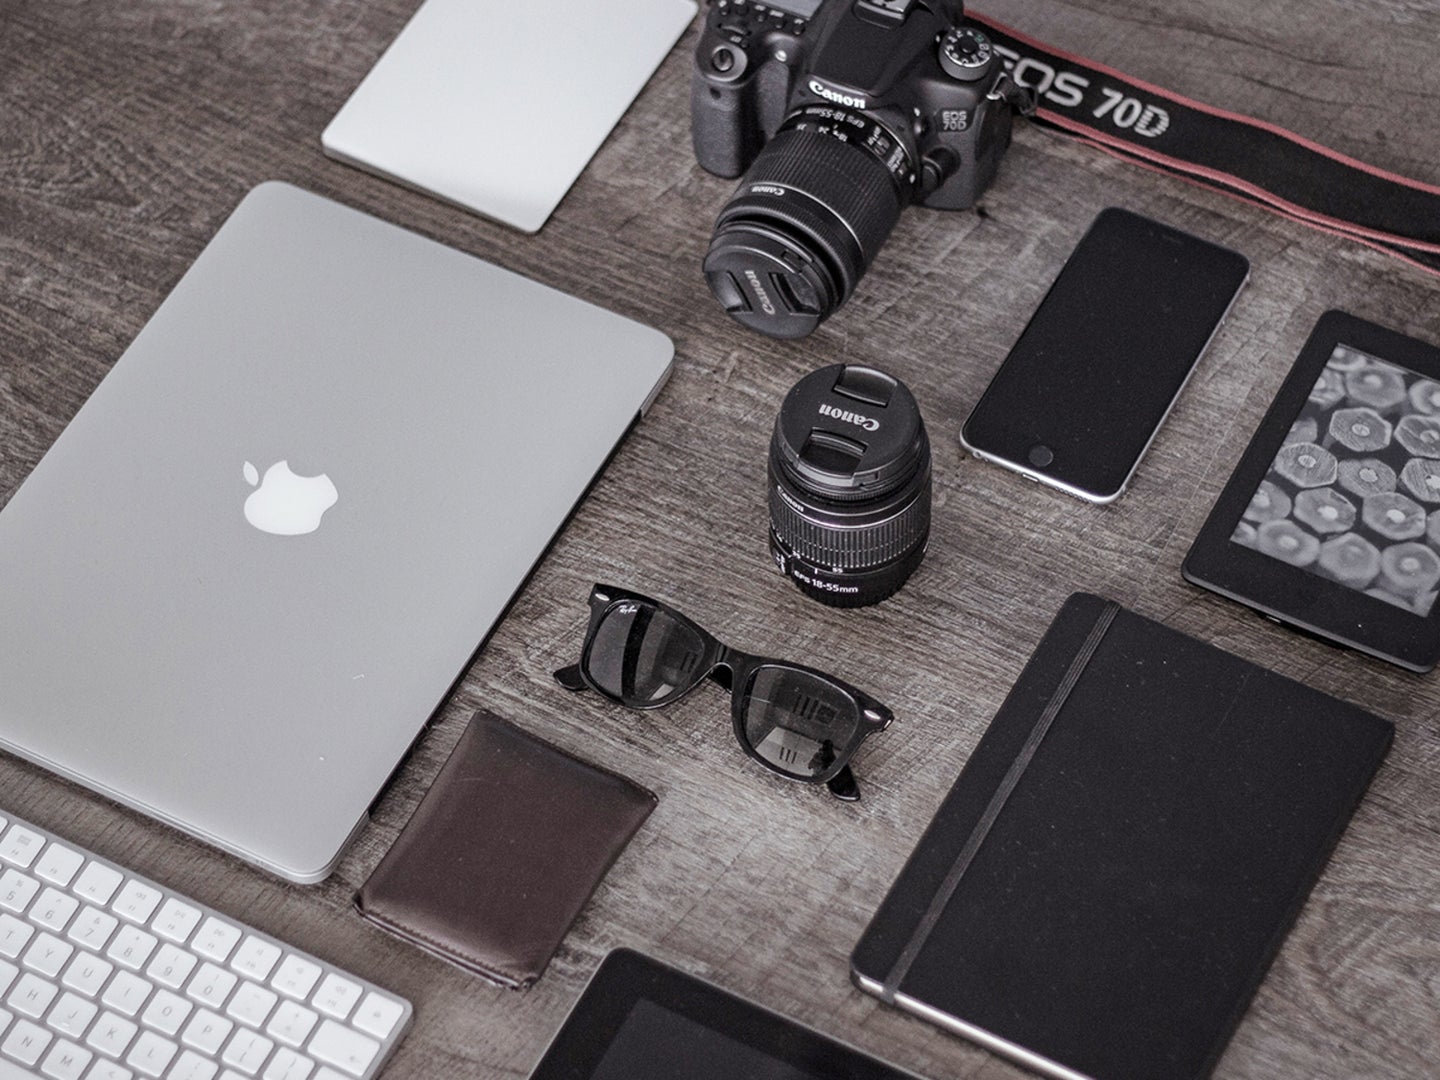 A MacBook laptop, an Apple keyboard, a digital camera, an iPhone, a camera lens, sunglasses, an iPad, and some notebooks on a gray wooden table.